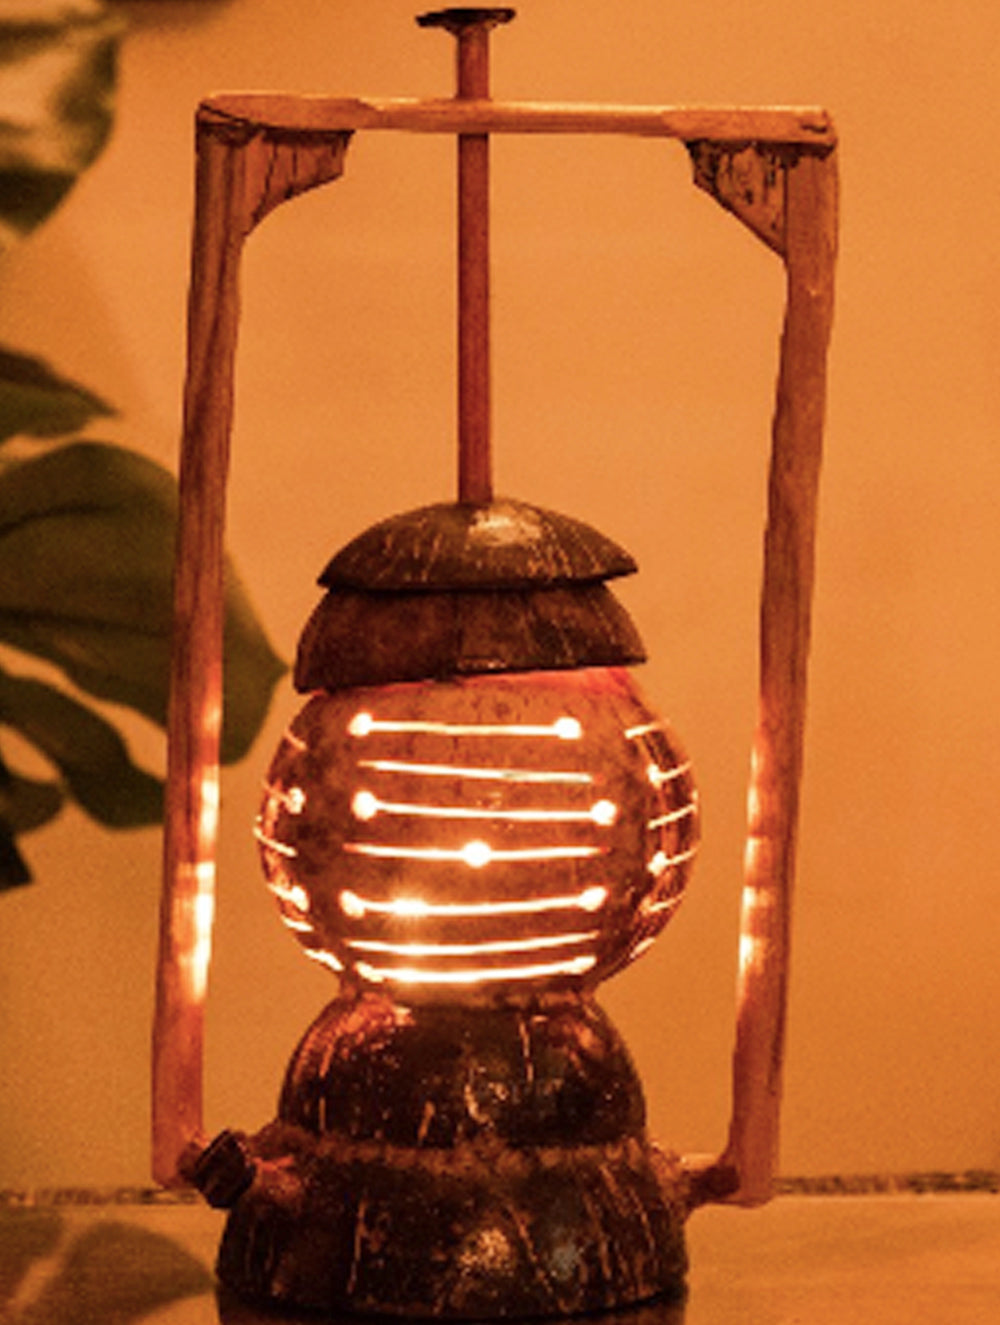 Load image into Gallery viewer, Coconut Craft Table Lamp